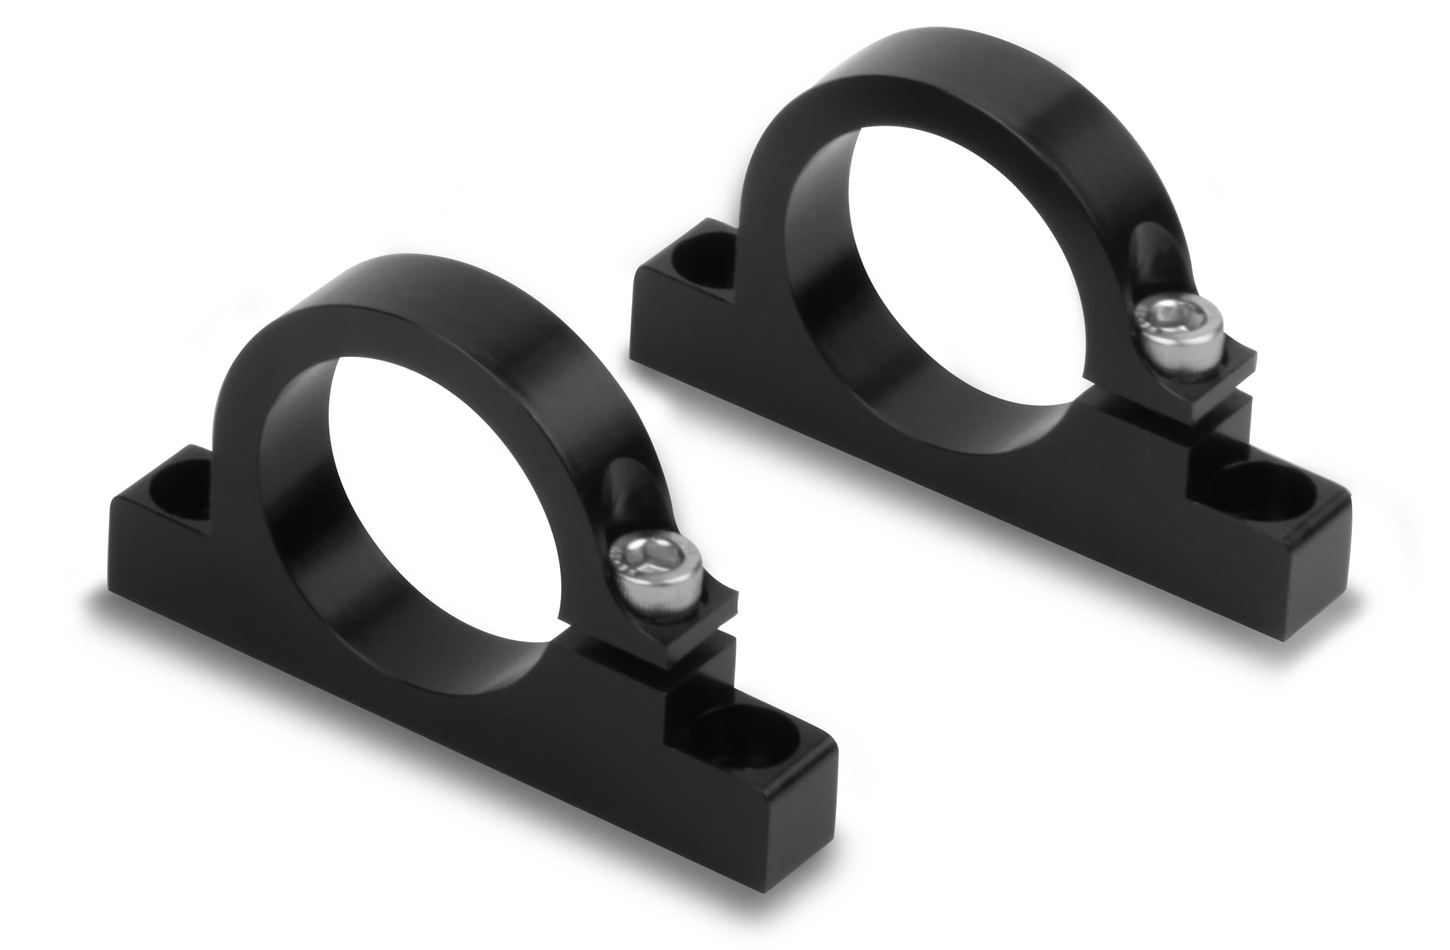 Holley 162-573 Fuel Filter Bracket, Clamp-On, 1-1/2 in OD Tubes, Aluminum, Black Anodized, Pair